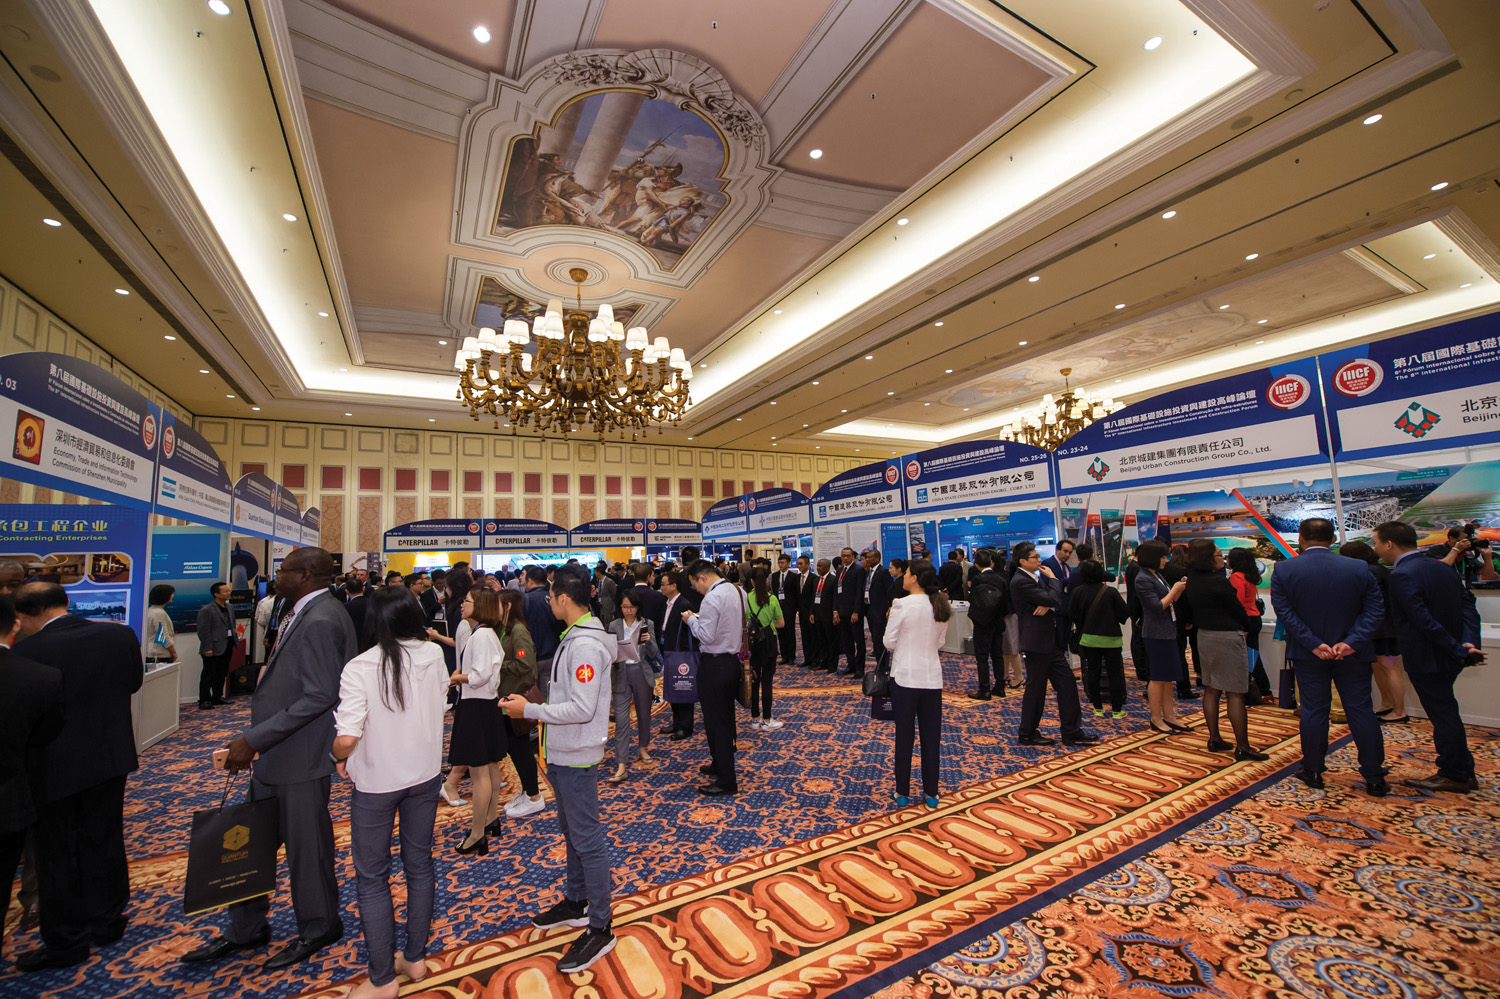 The 8th IIICF was held in Macao on 1 and 2 June